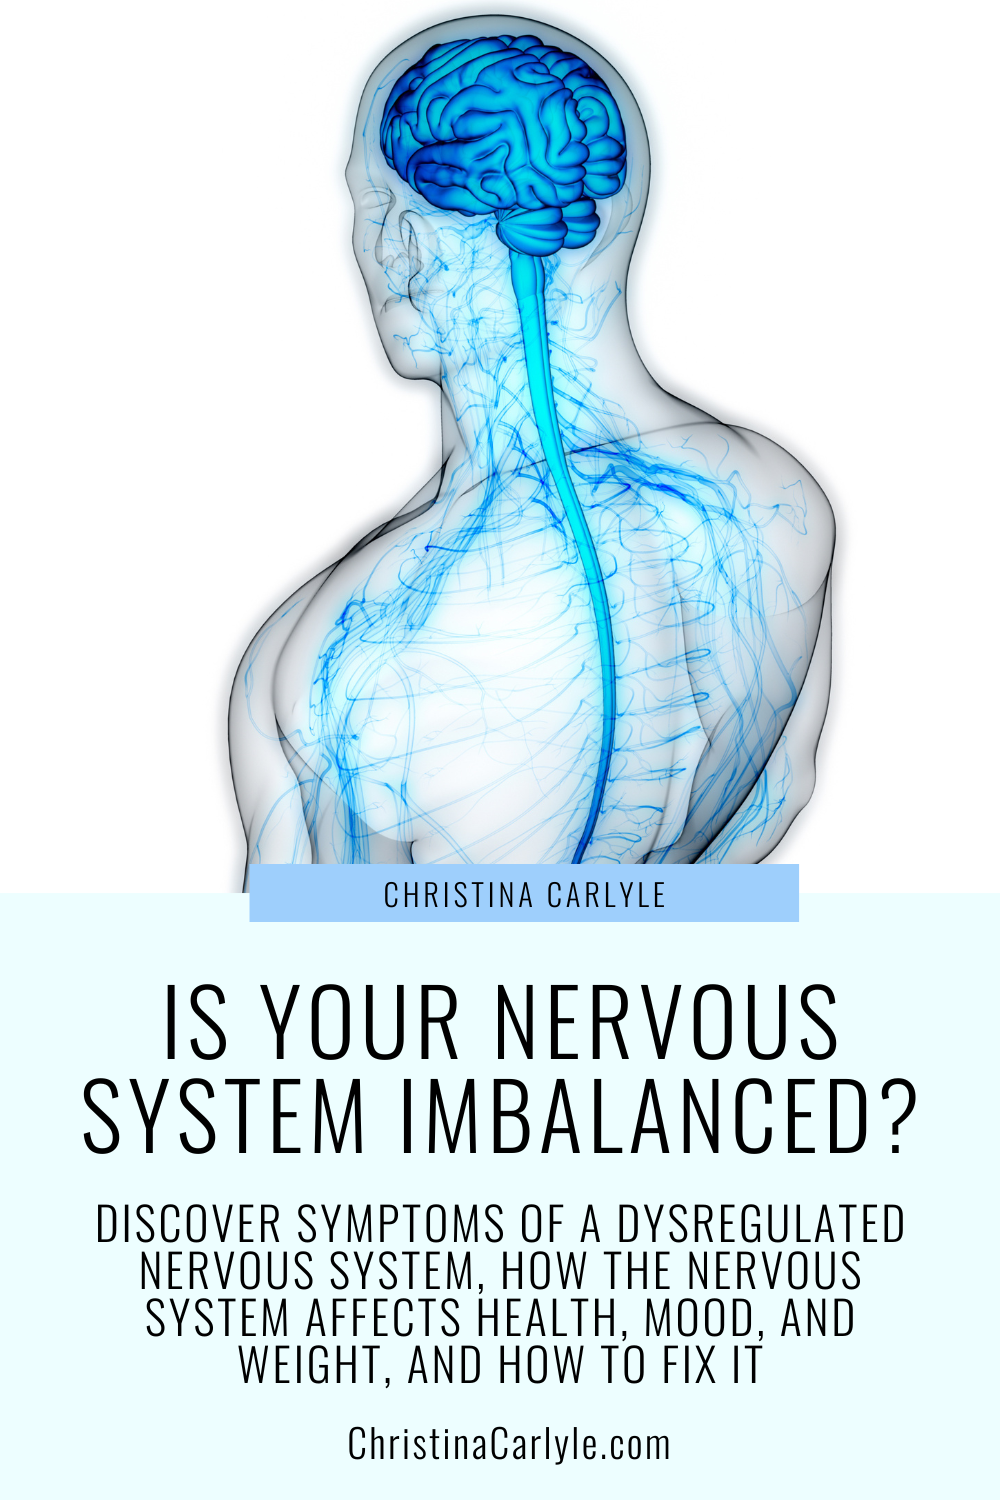 a picture of the central nervous system and text that says Is your Nervous System Imbalanced?